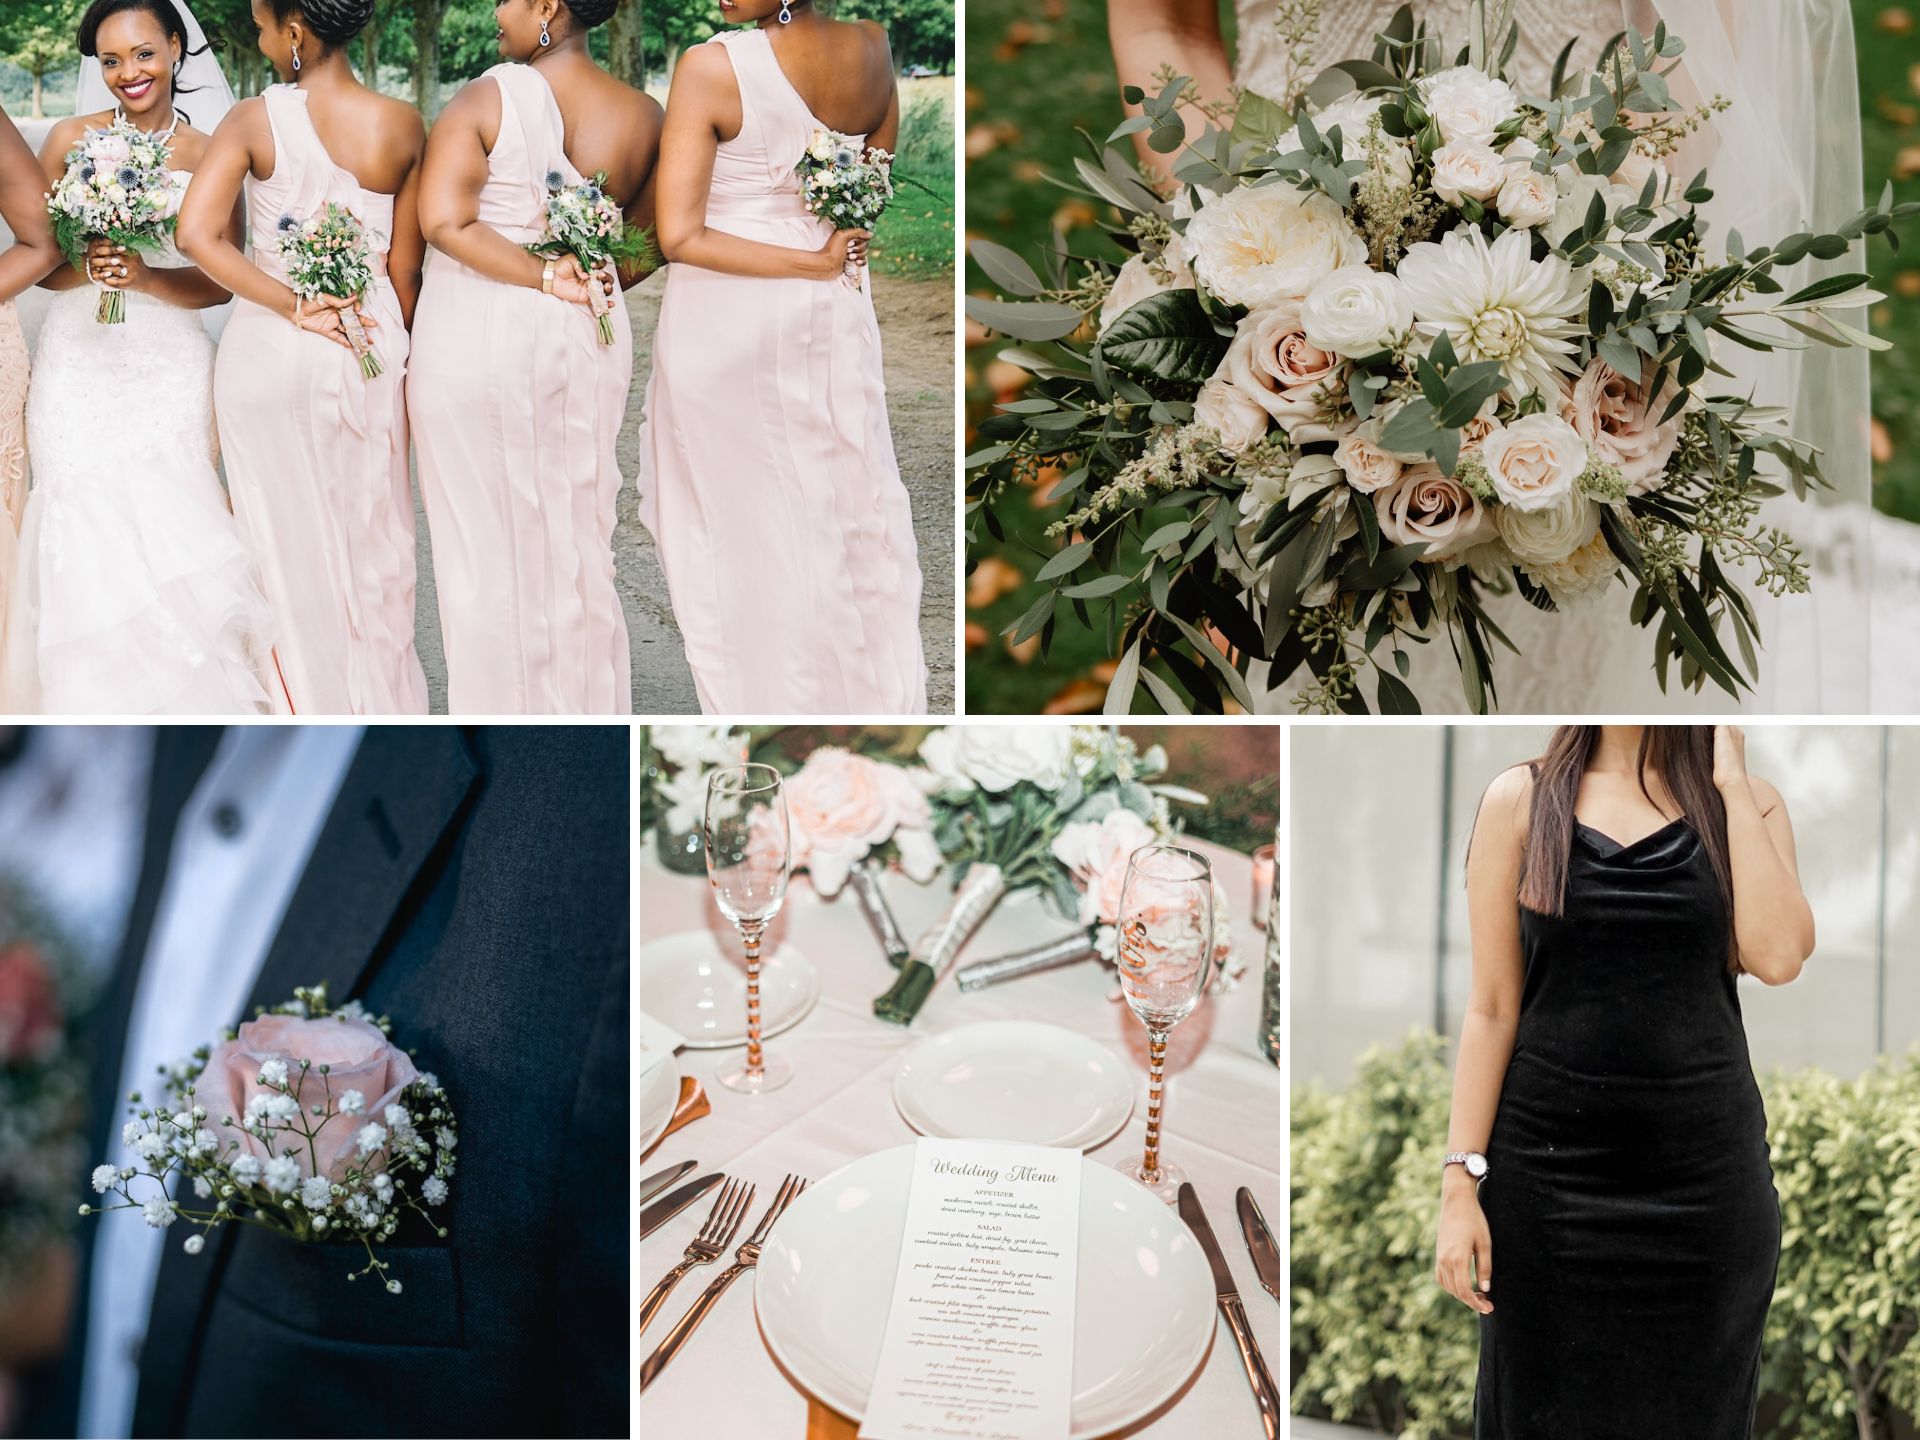 Black and light pink wedding color ideas.